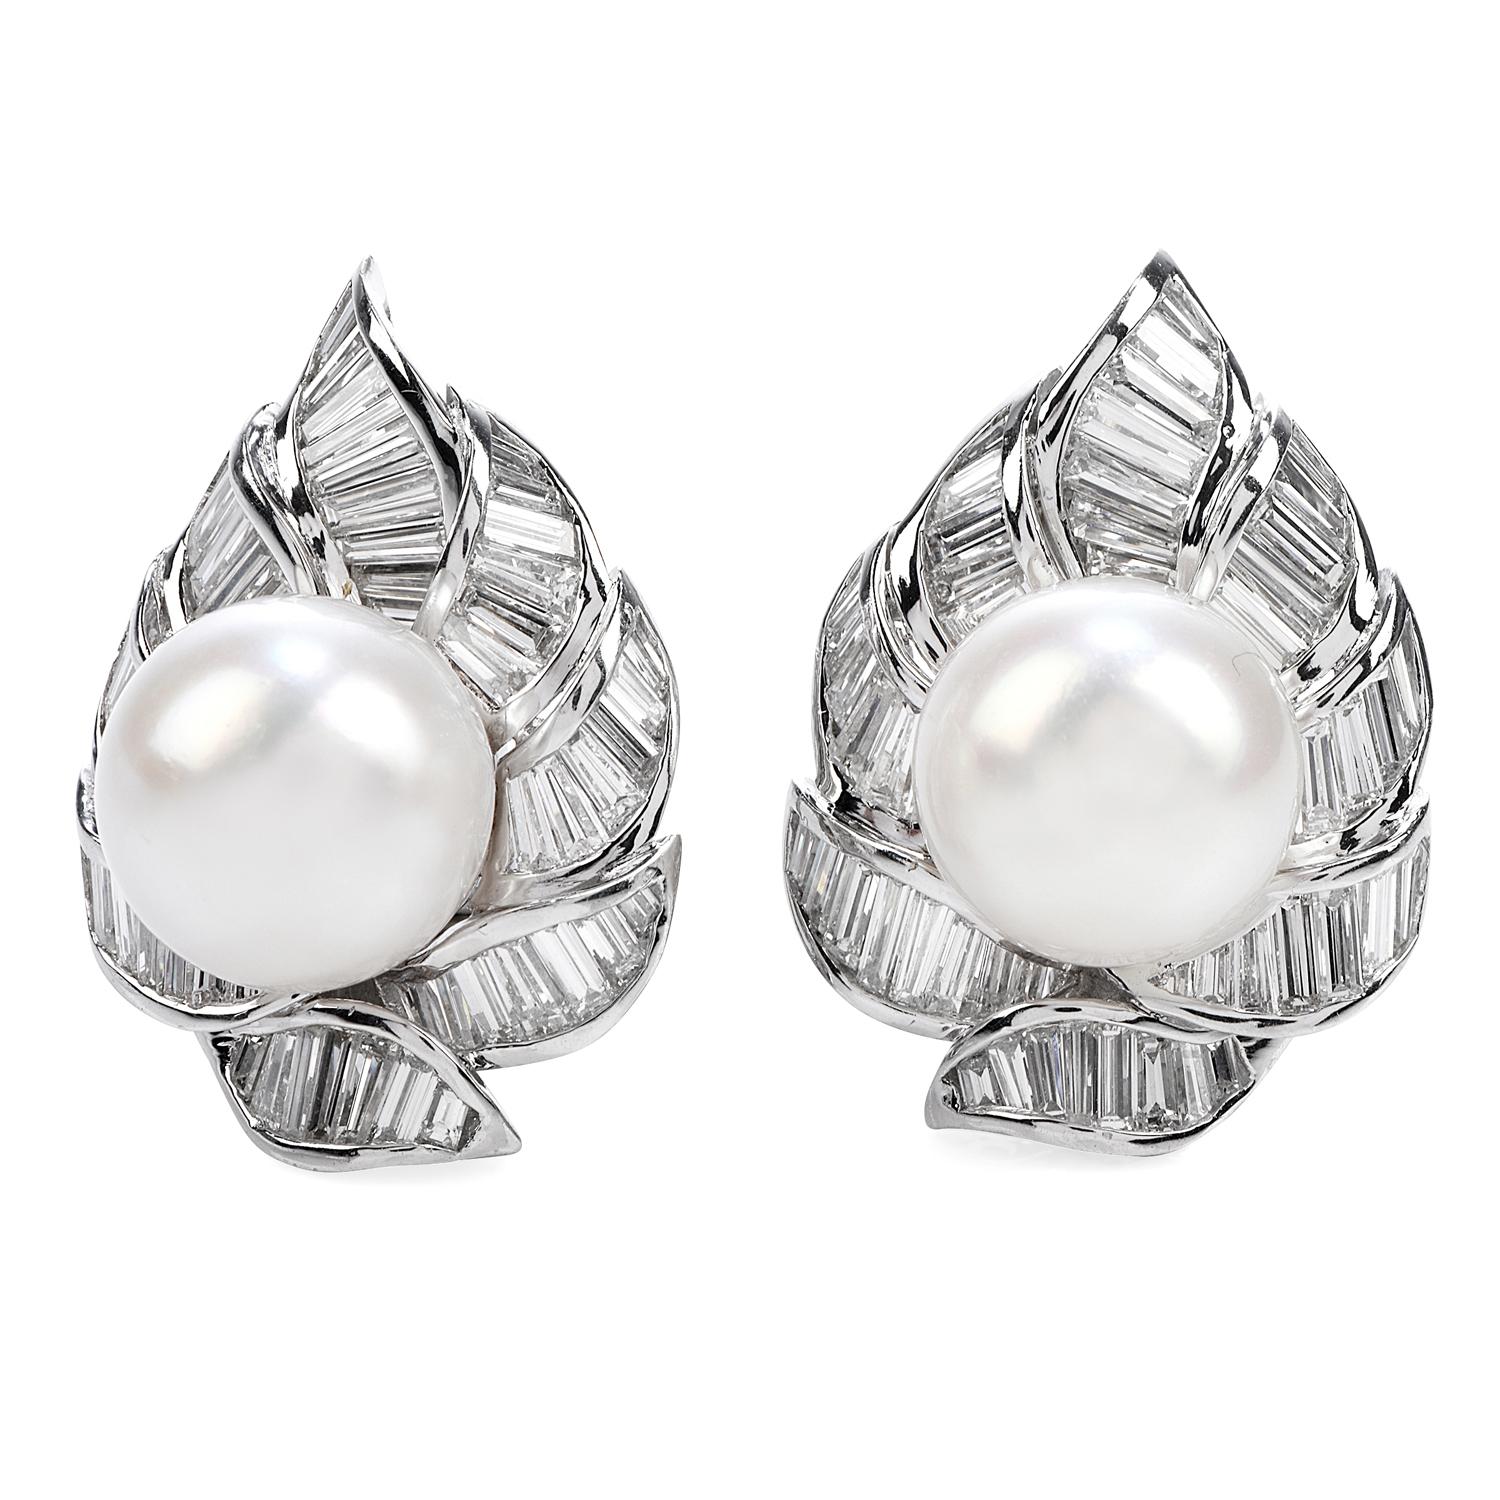 Timeless Elegance and Shinning from every side!

Crafted in Platinum, these Clip On Floral Inspired Earrings are perfect for a Special occasion, 

These spectacular pieces have a 15 mm South Sea Pearl, High Luster, barely any blemishes and Silver